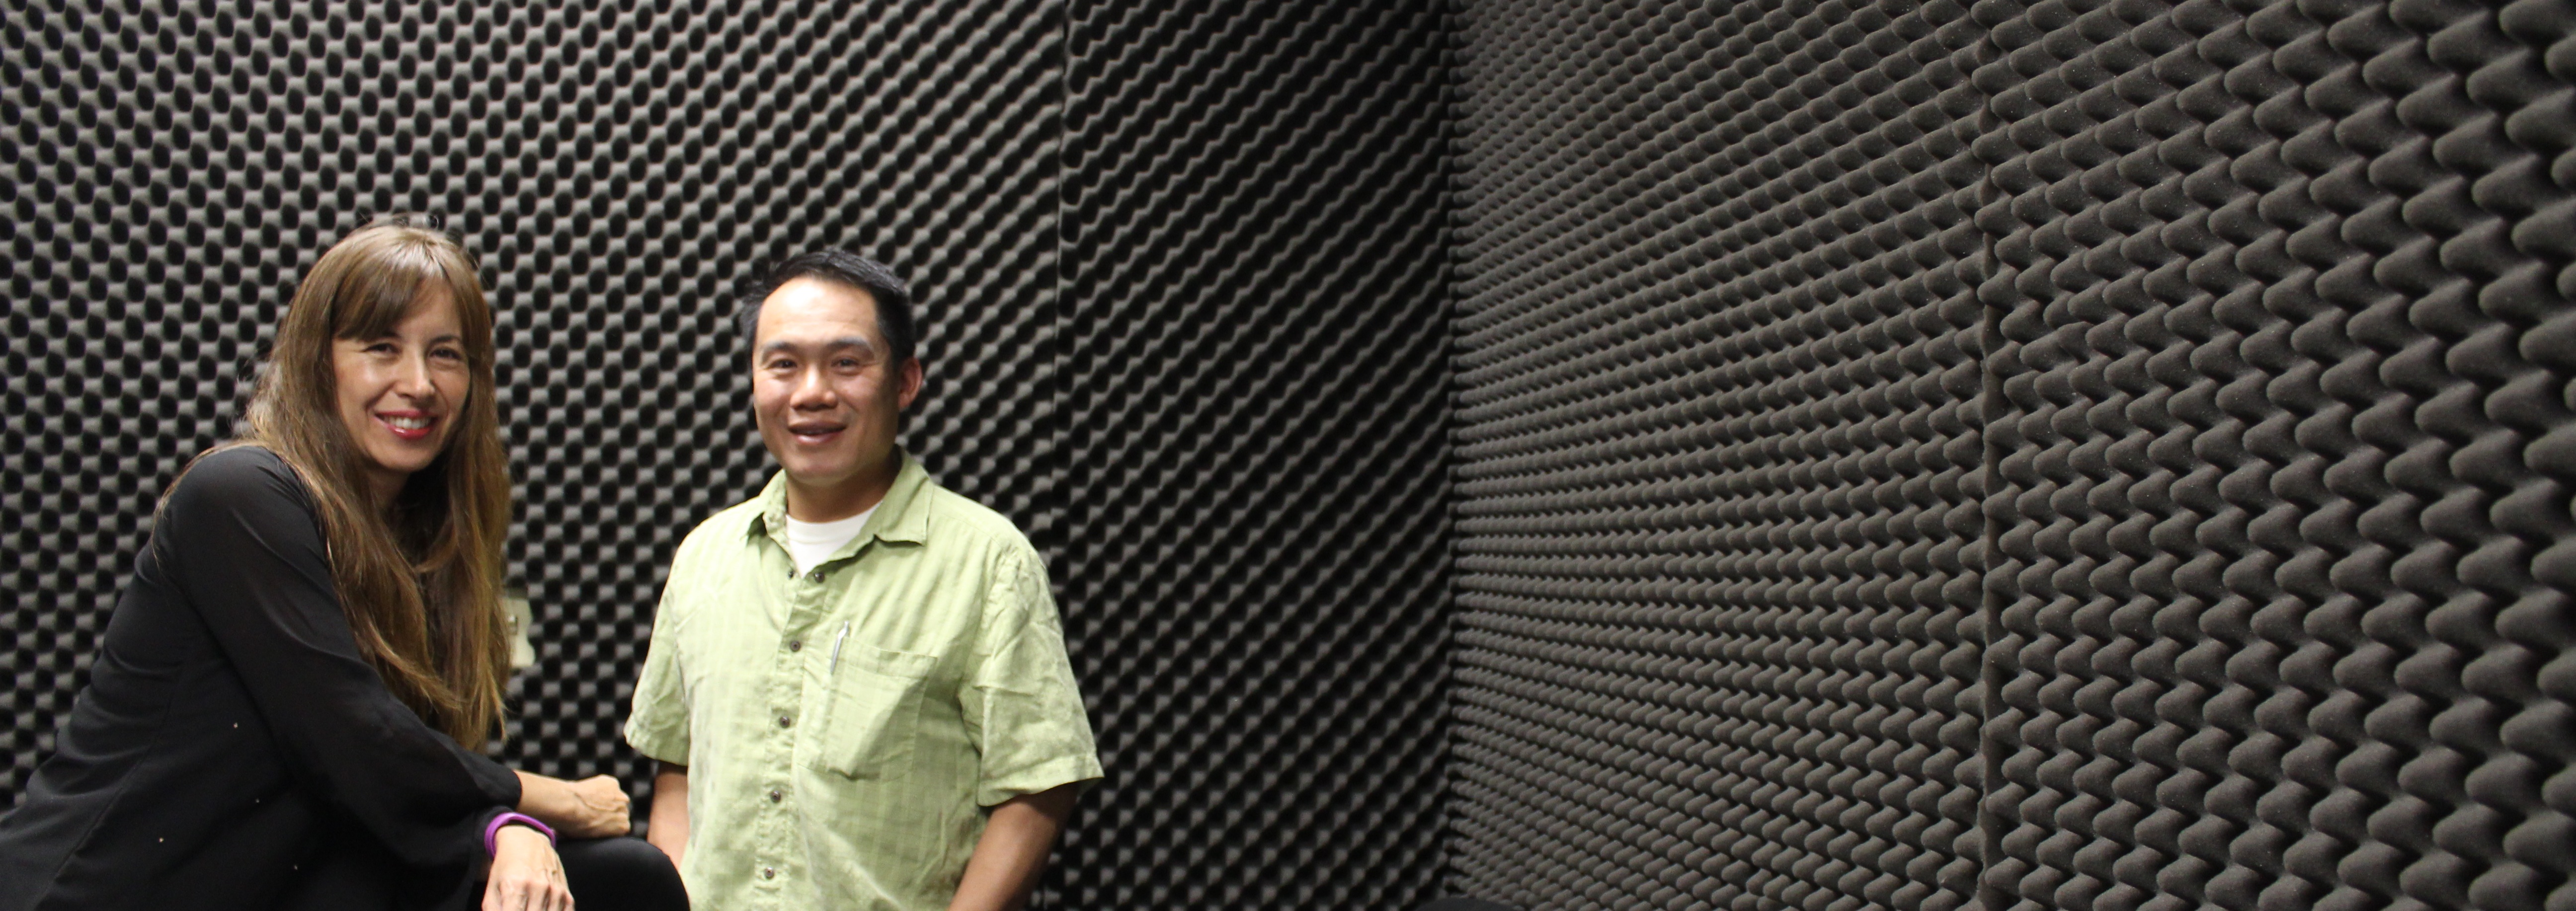 FearCast – 10.07.14 – Convoluted Liabilities and Potential Lawsuits with Raymond Lim